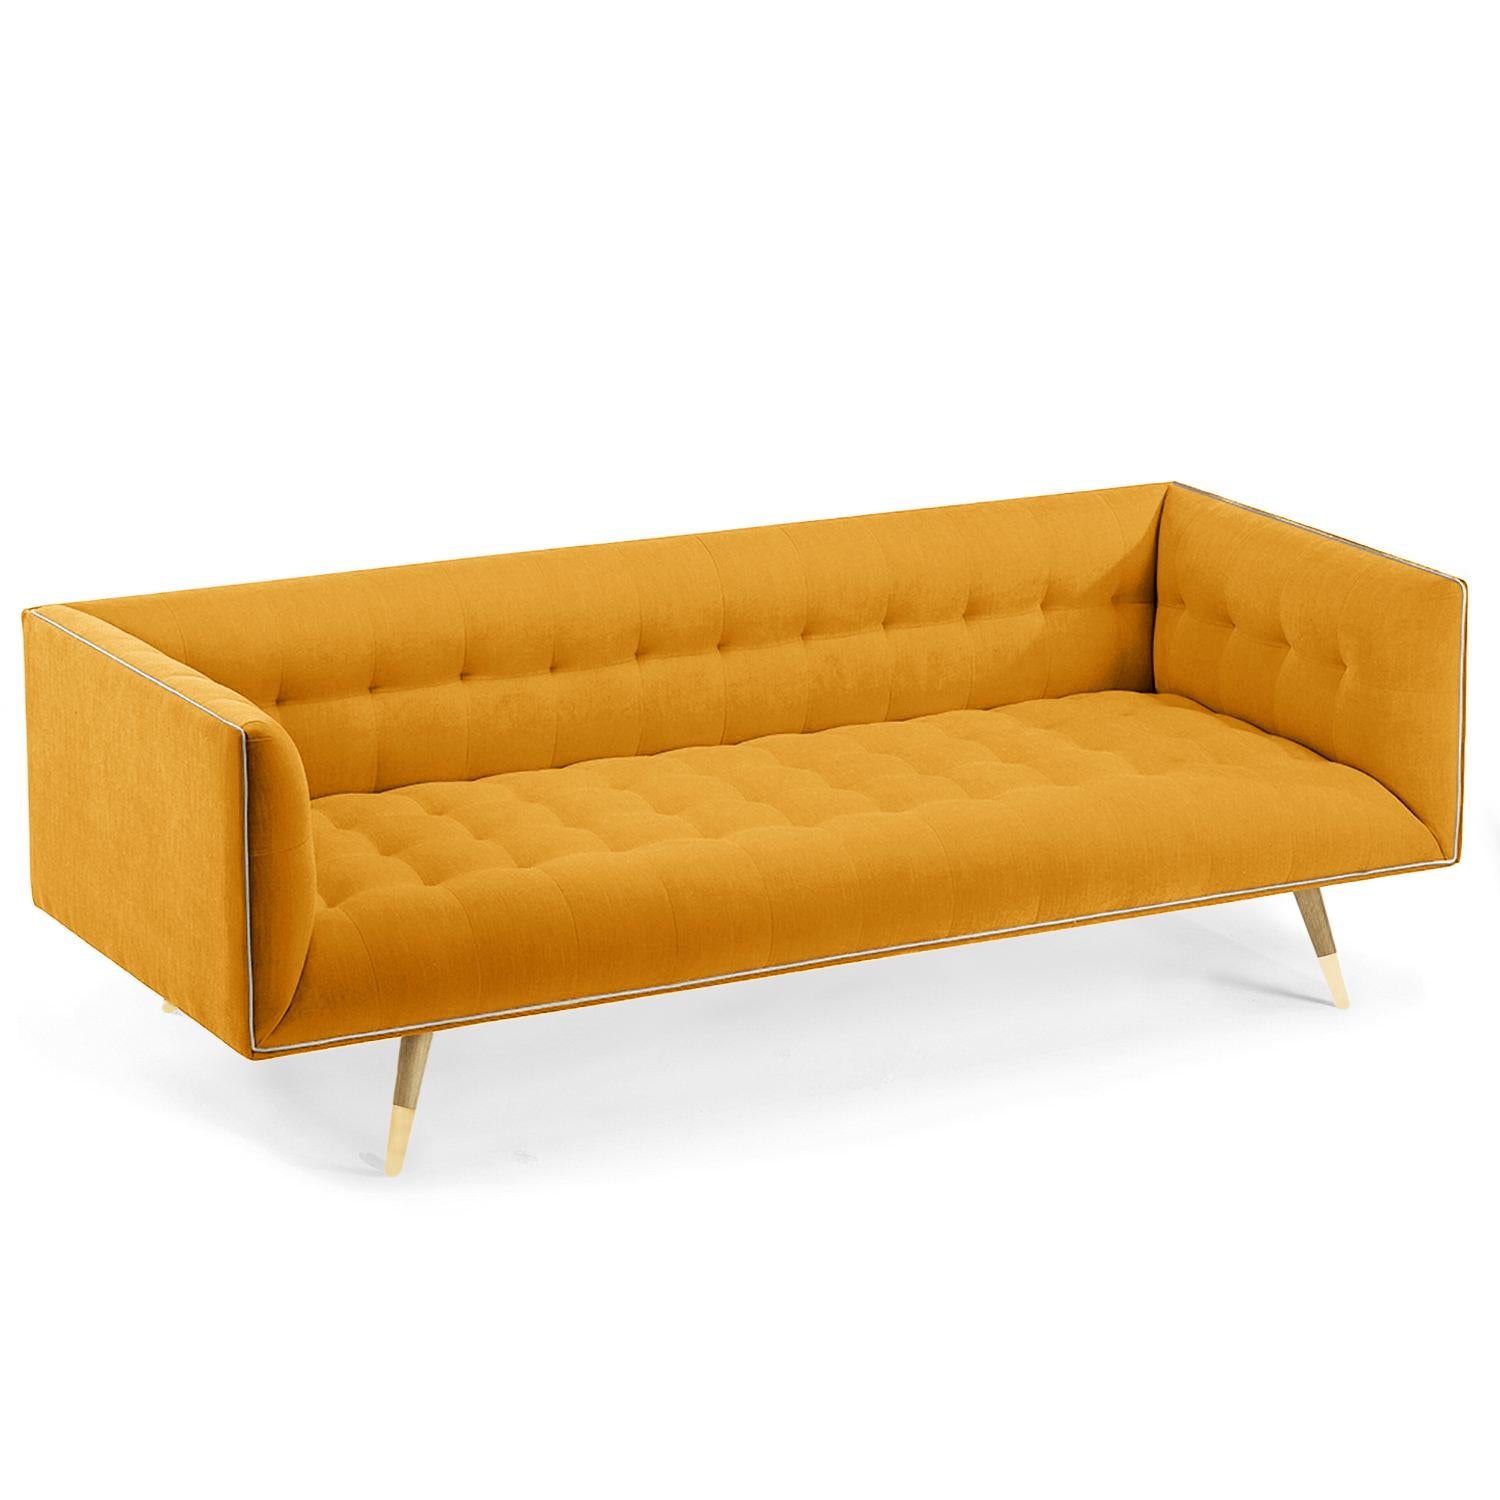 Portuguese Dust Sofa, Medium with Natural Light Oak - Polished Brass For Sale